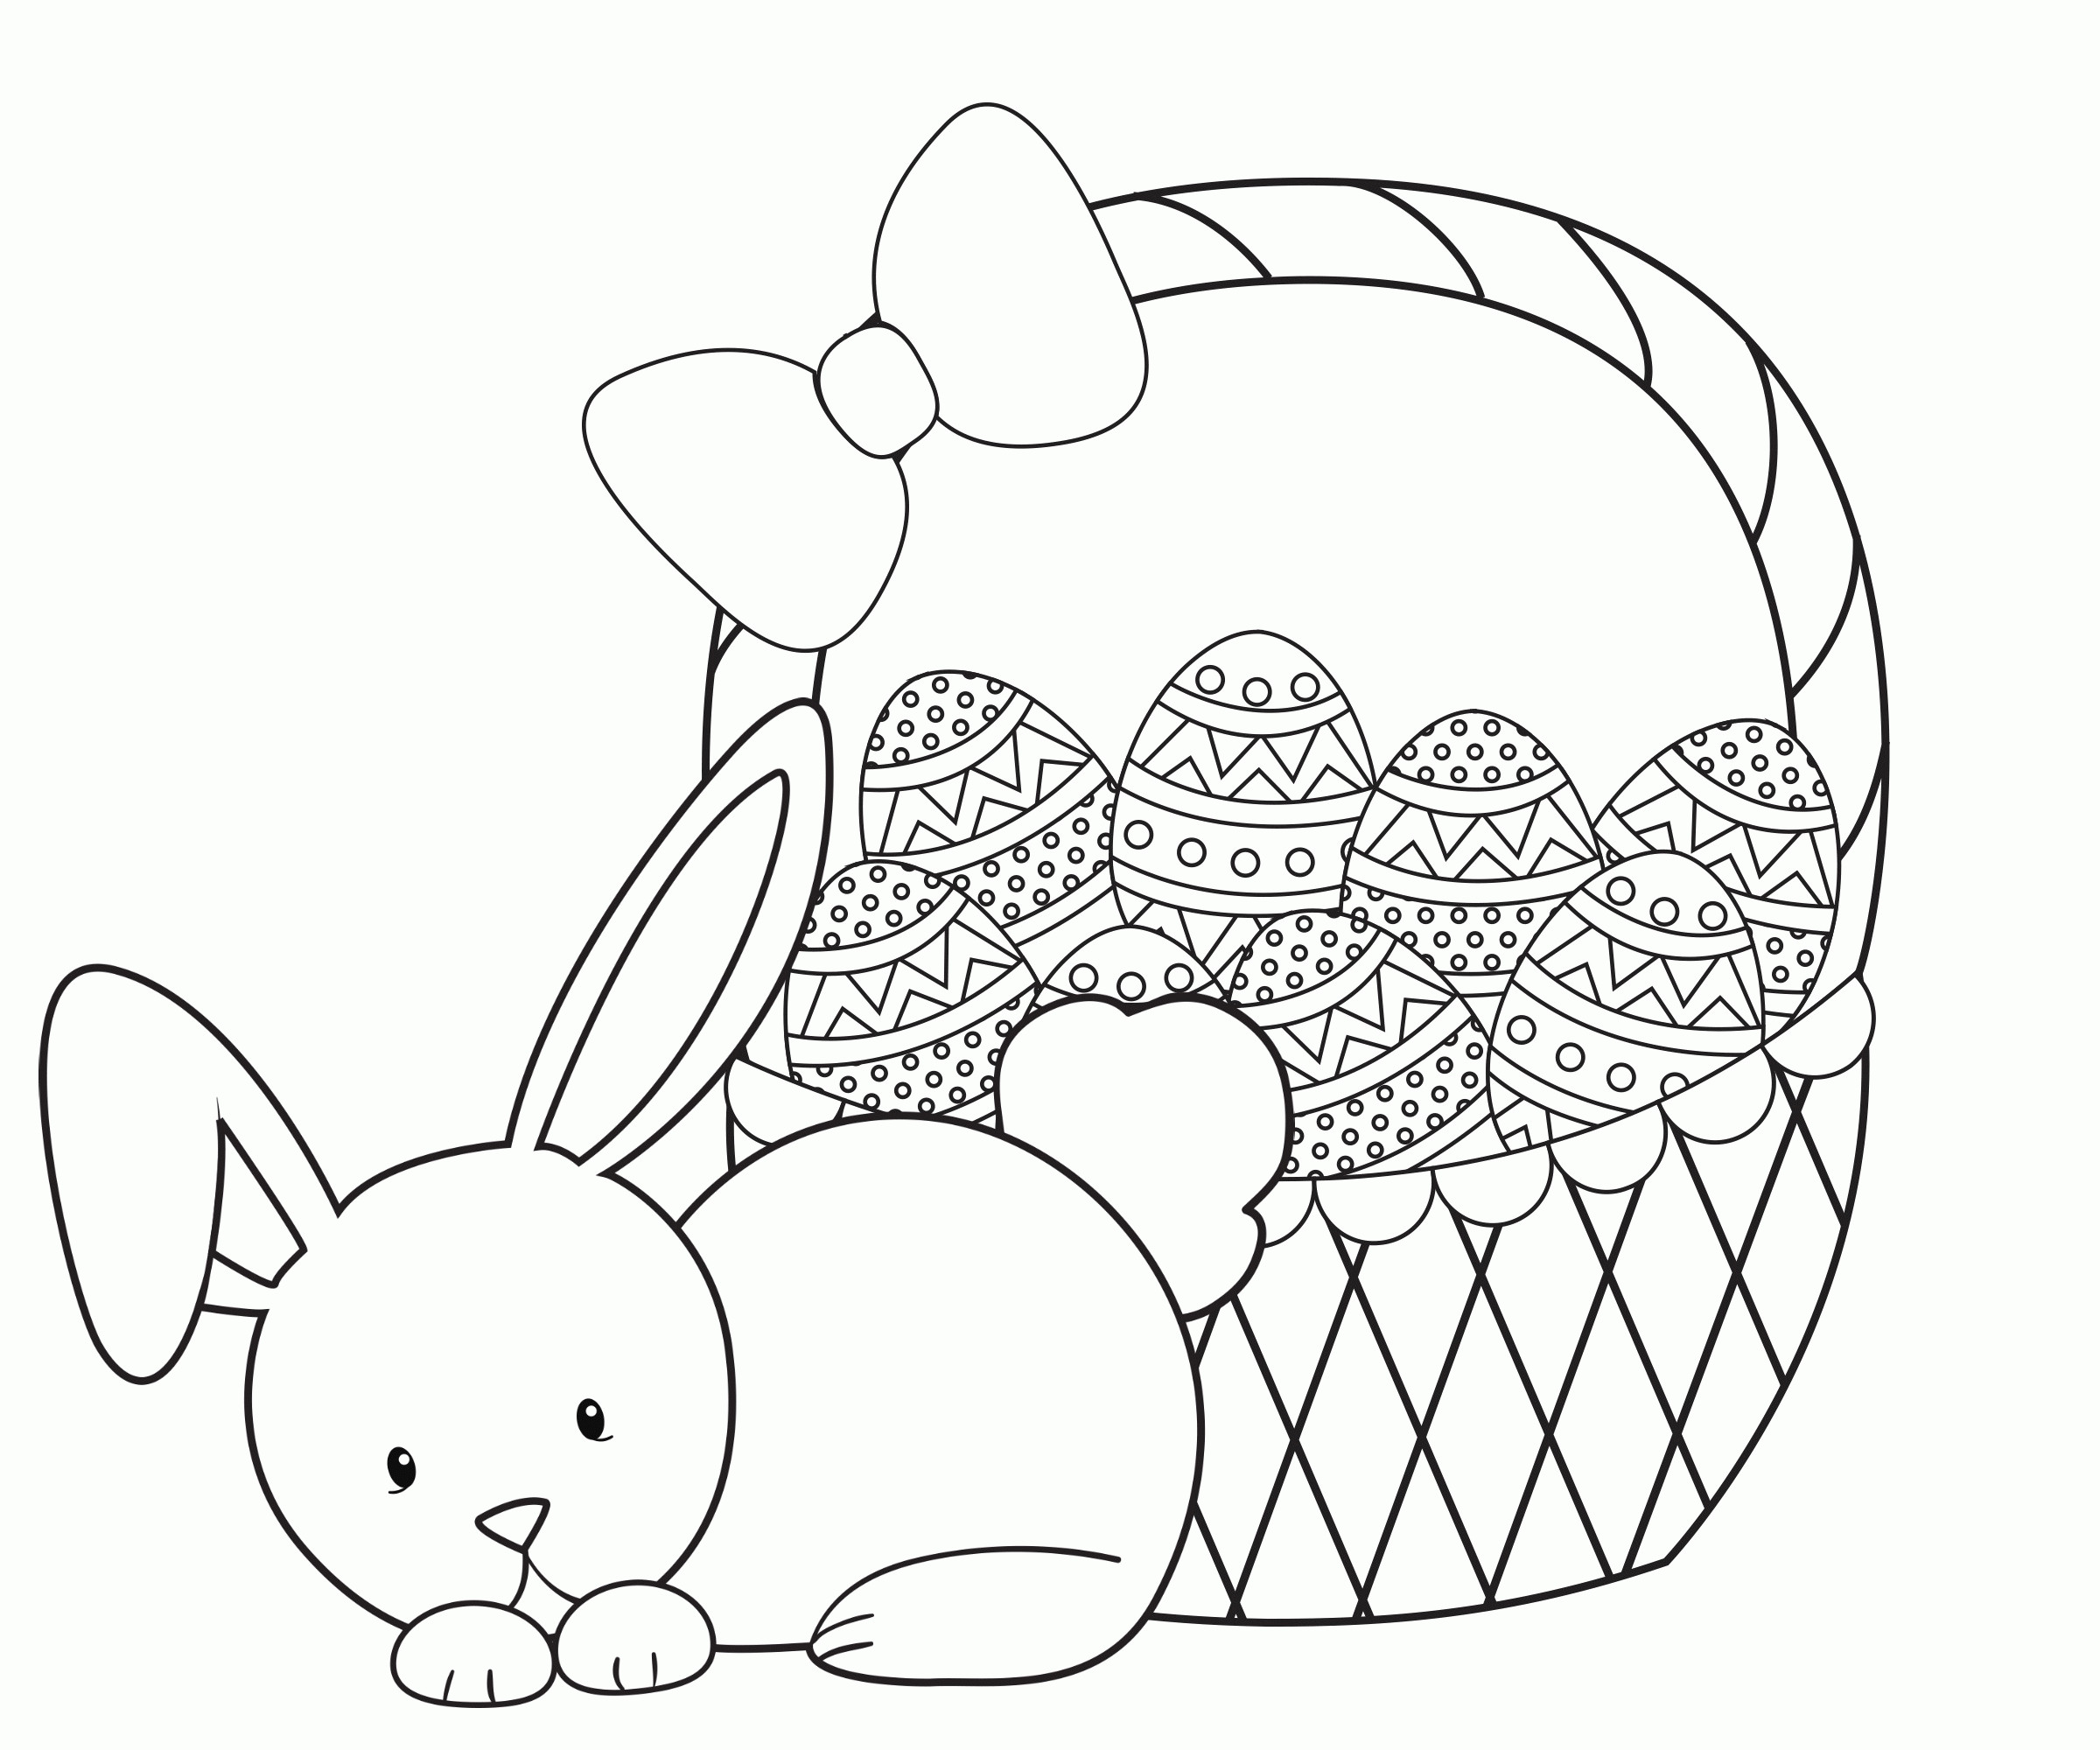 Coloring Book Pages Easter
 Easter Basket Coloring Pages Best Coloring Pages For Kids